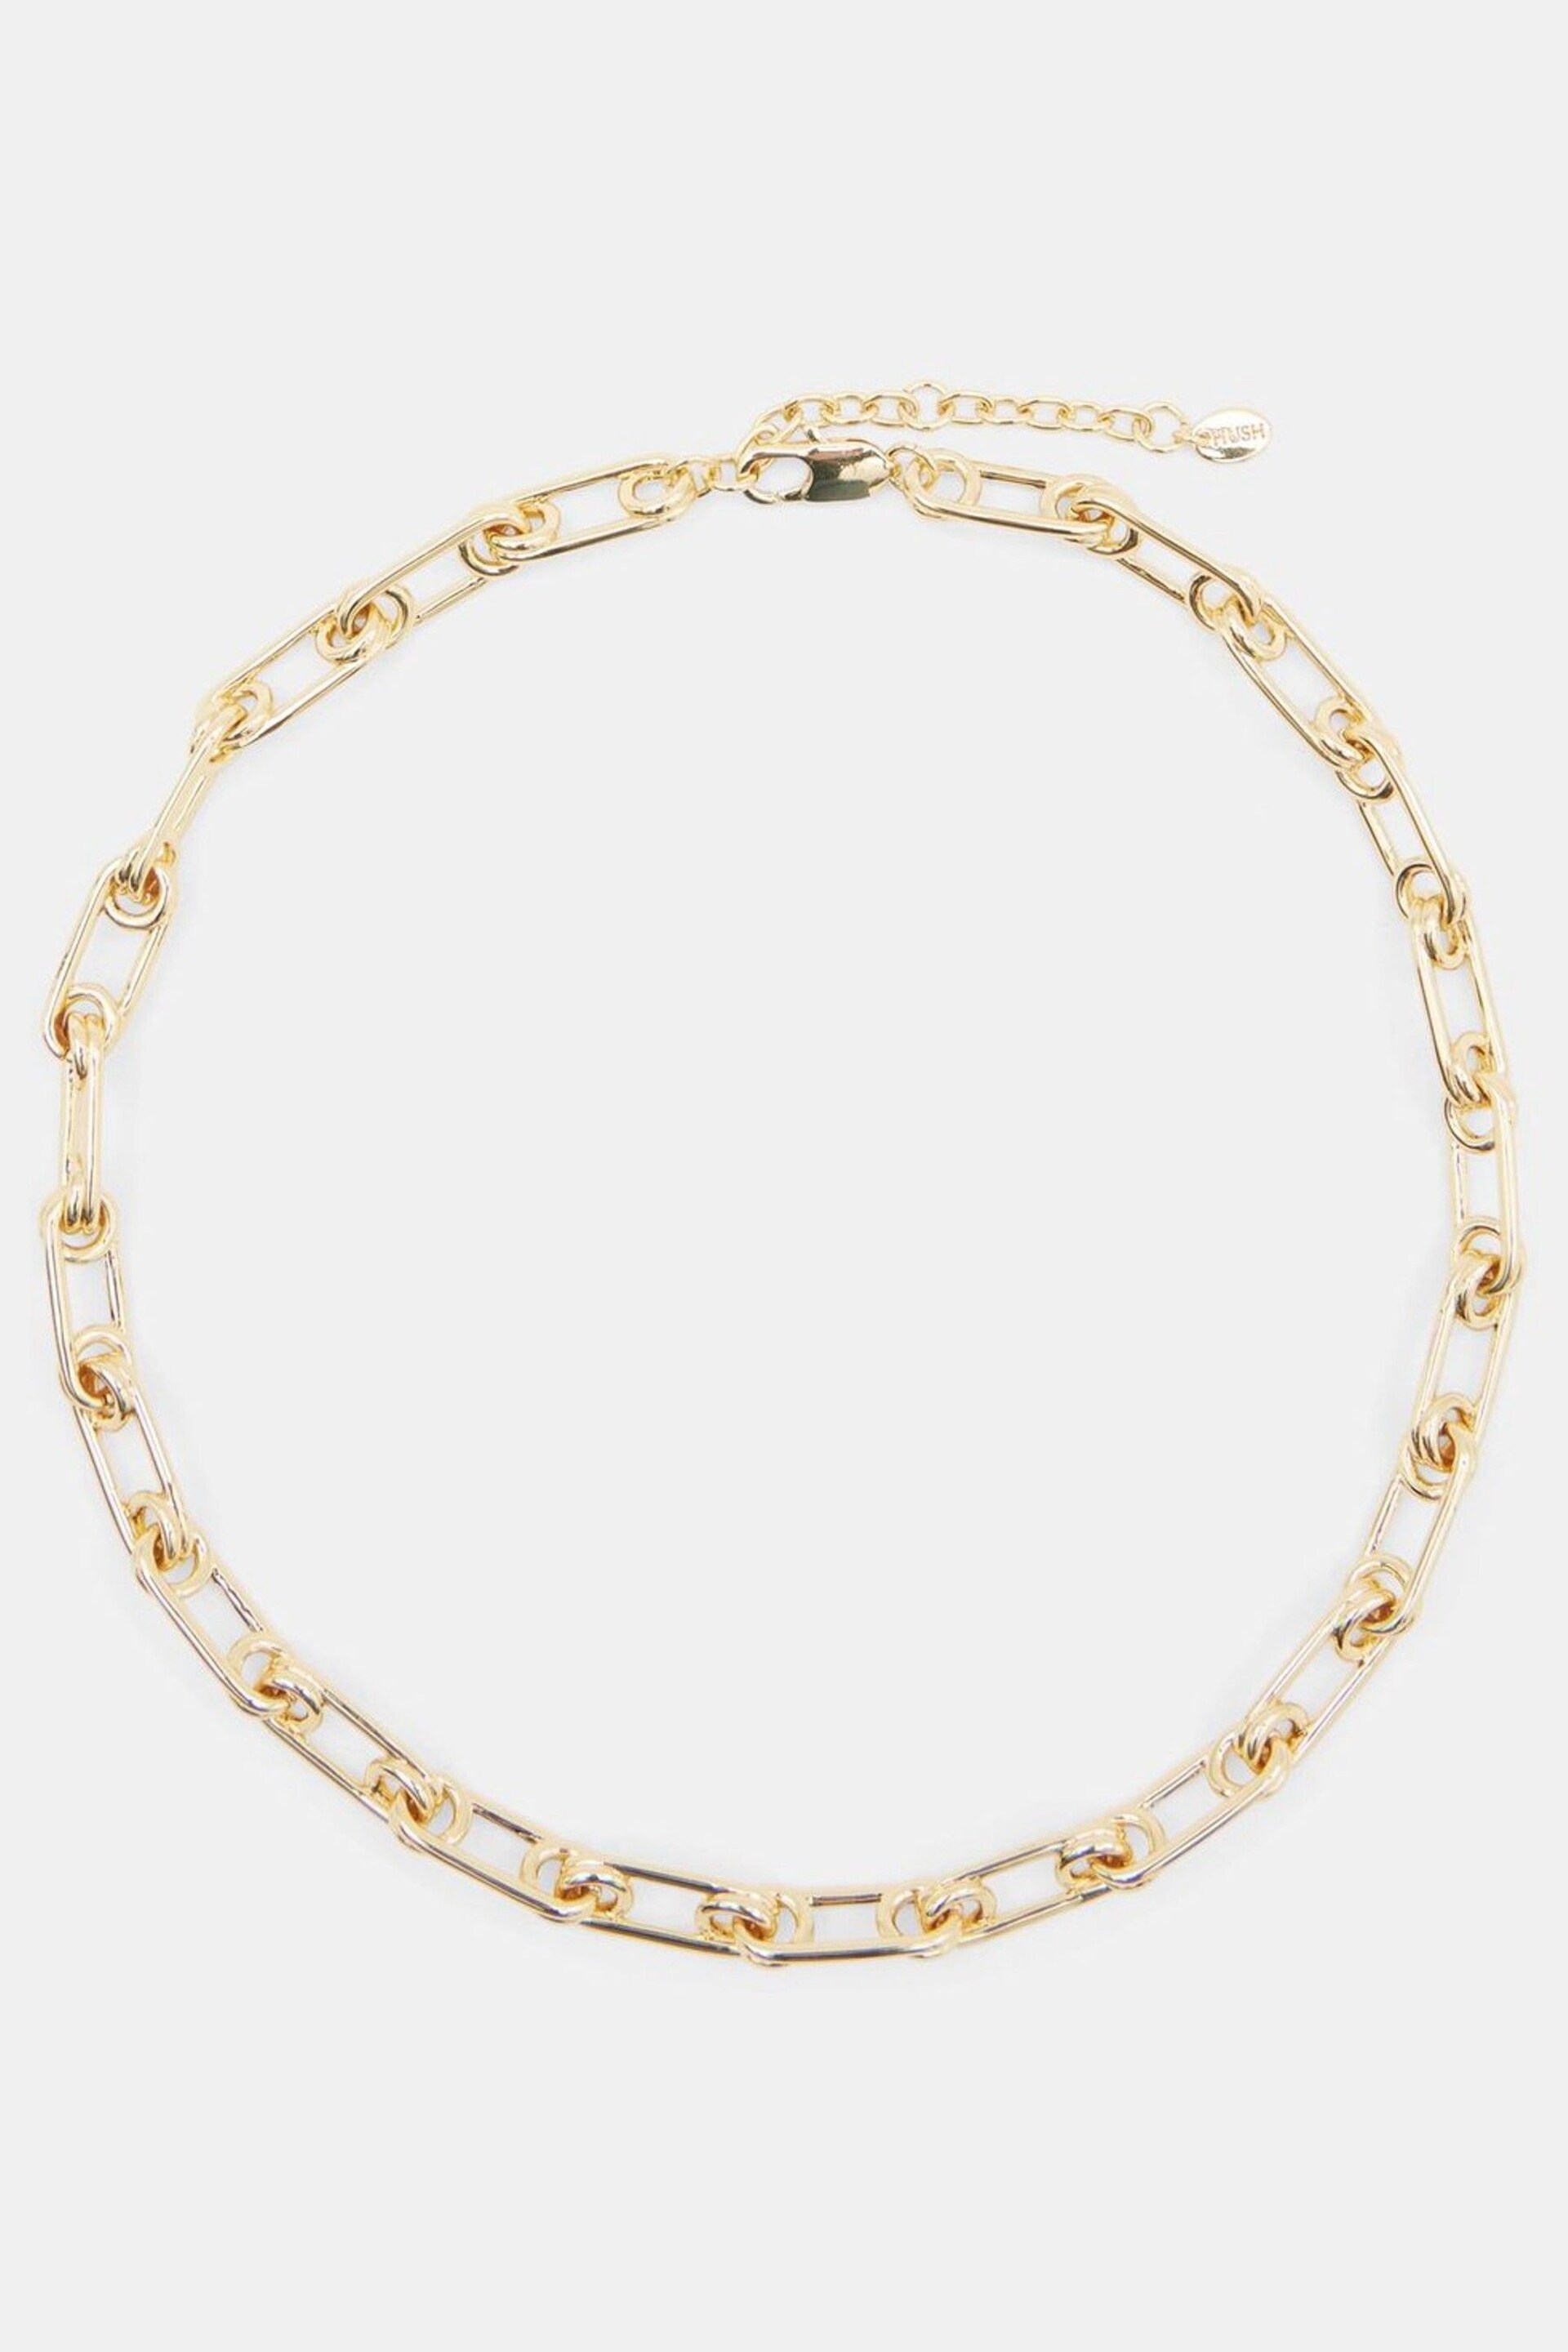 Hush Gold Tone Josey Chain Necklace - Image 1 of 4